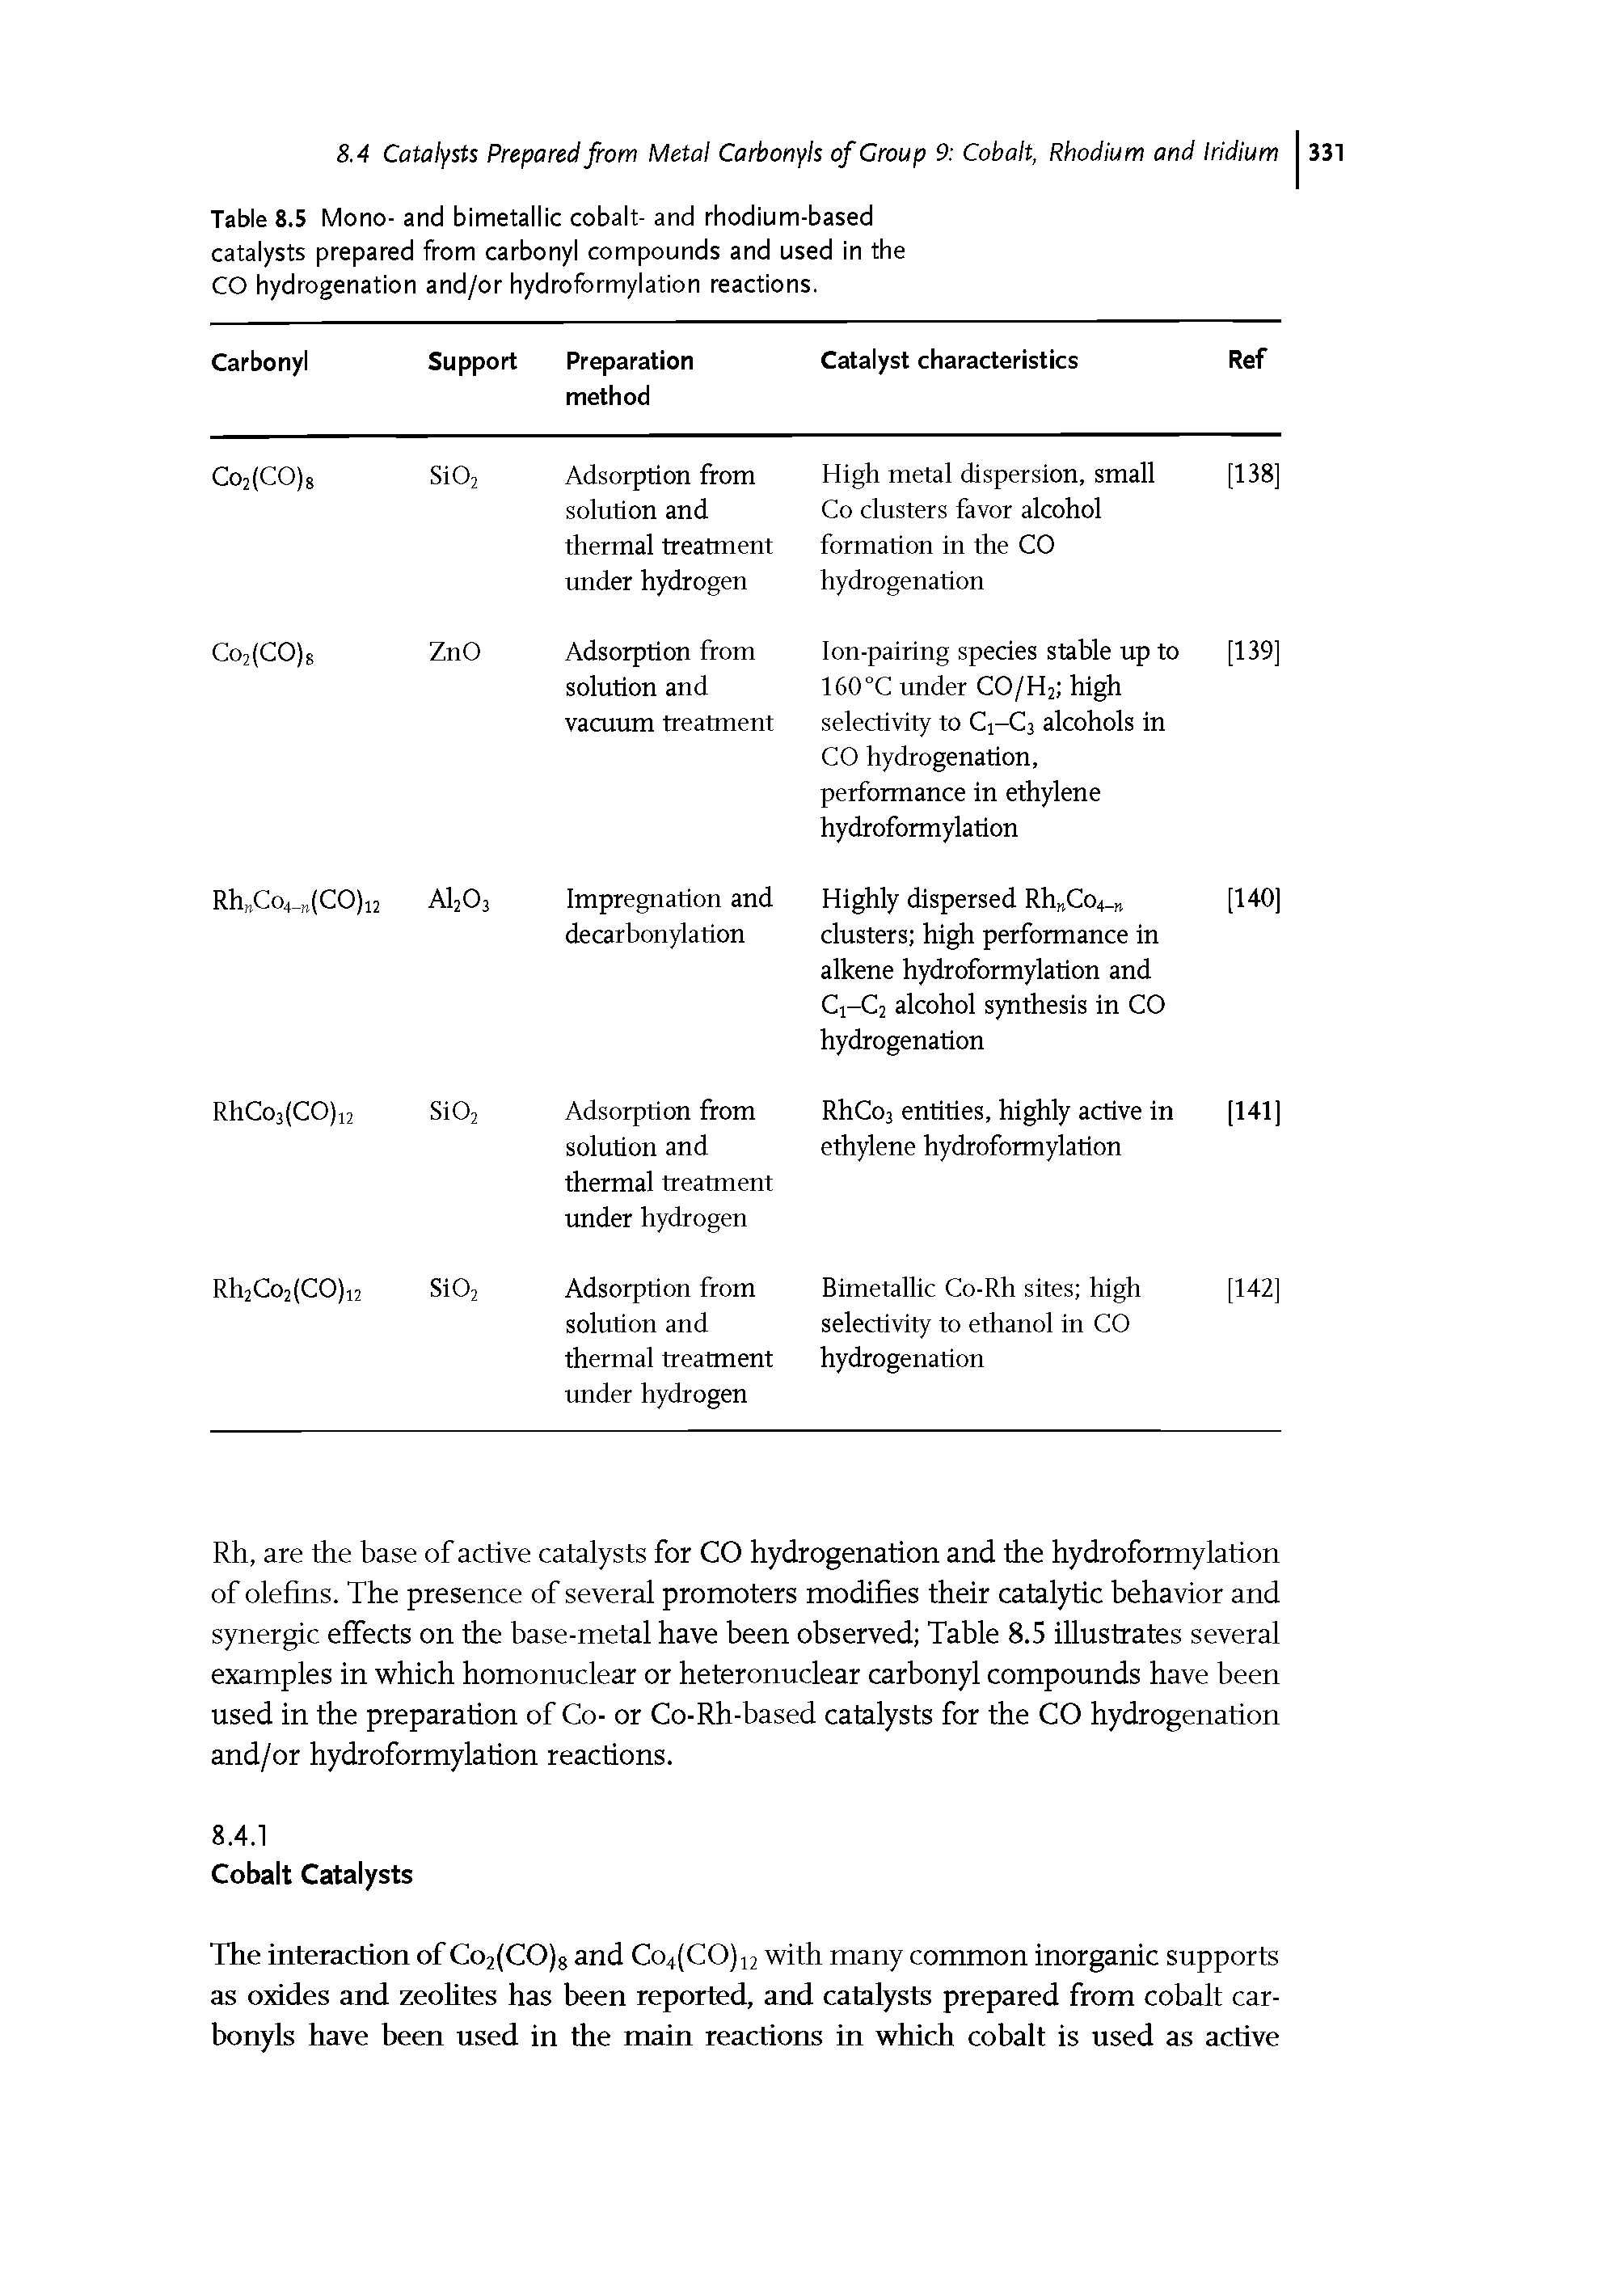 Table 8.5 Mono- and bimetallic cobalt- and rhodium-based catalysts prepared from carbonyl compounds and used in the CO hydrogenation and/or hydroformylation reactions.